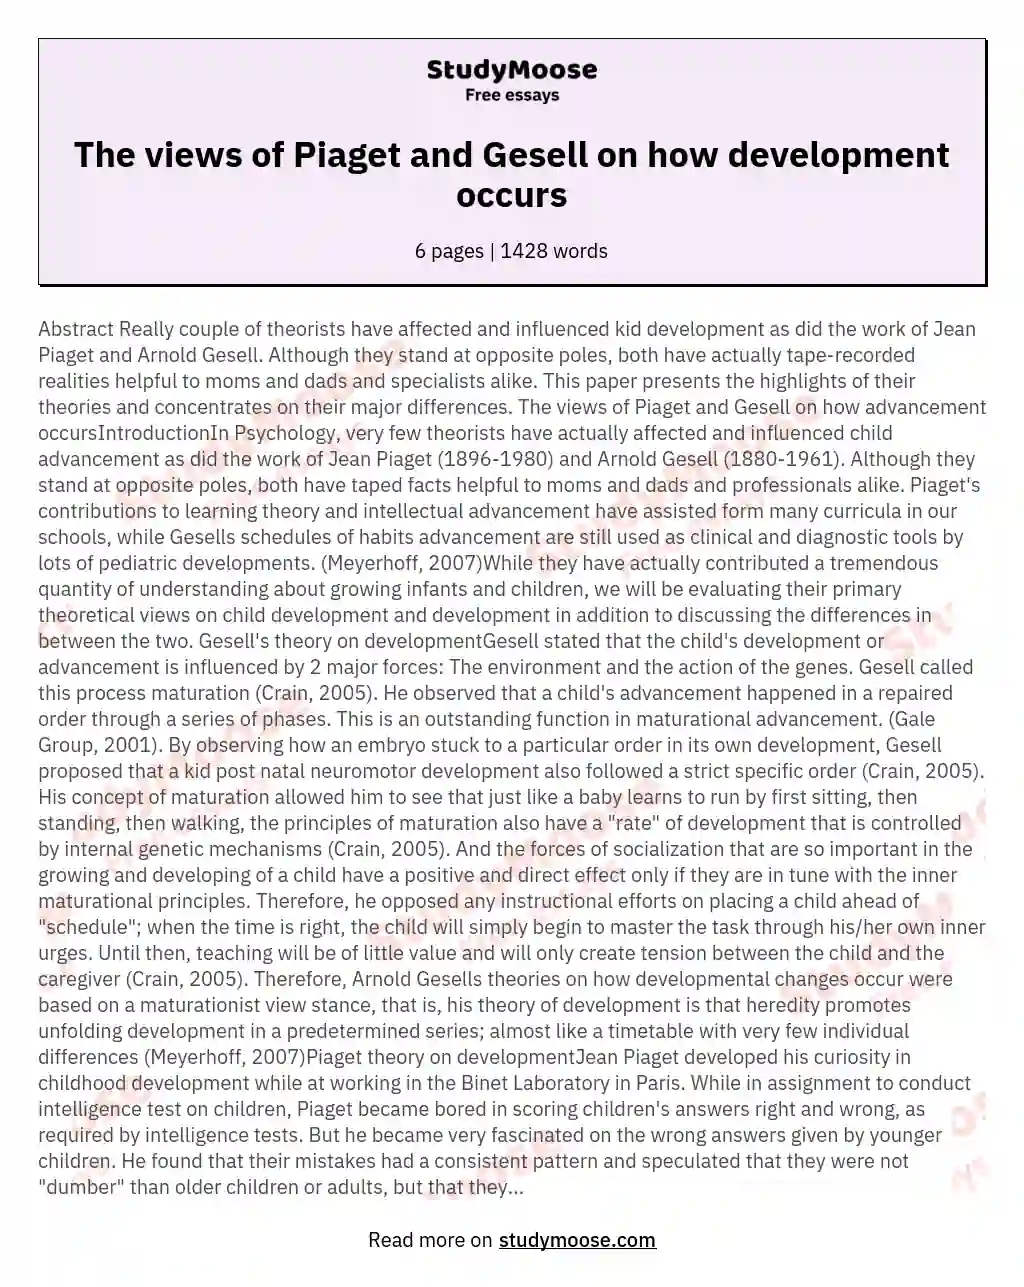 The views of Piaget and Gesell on how development occurs